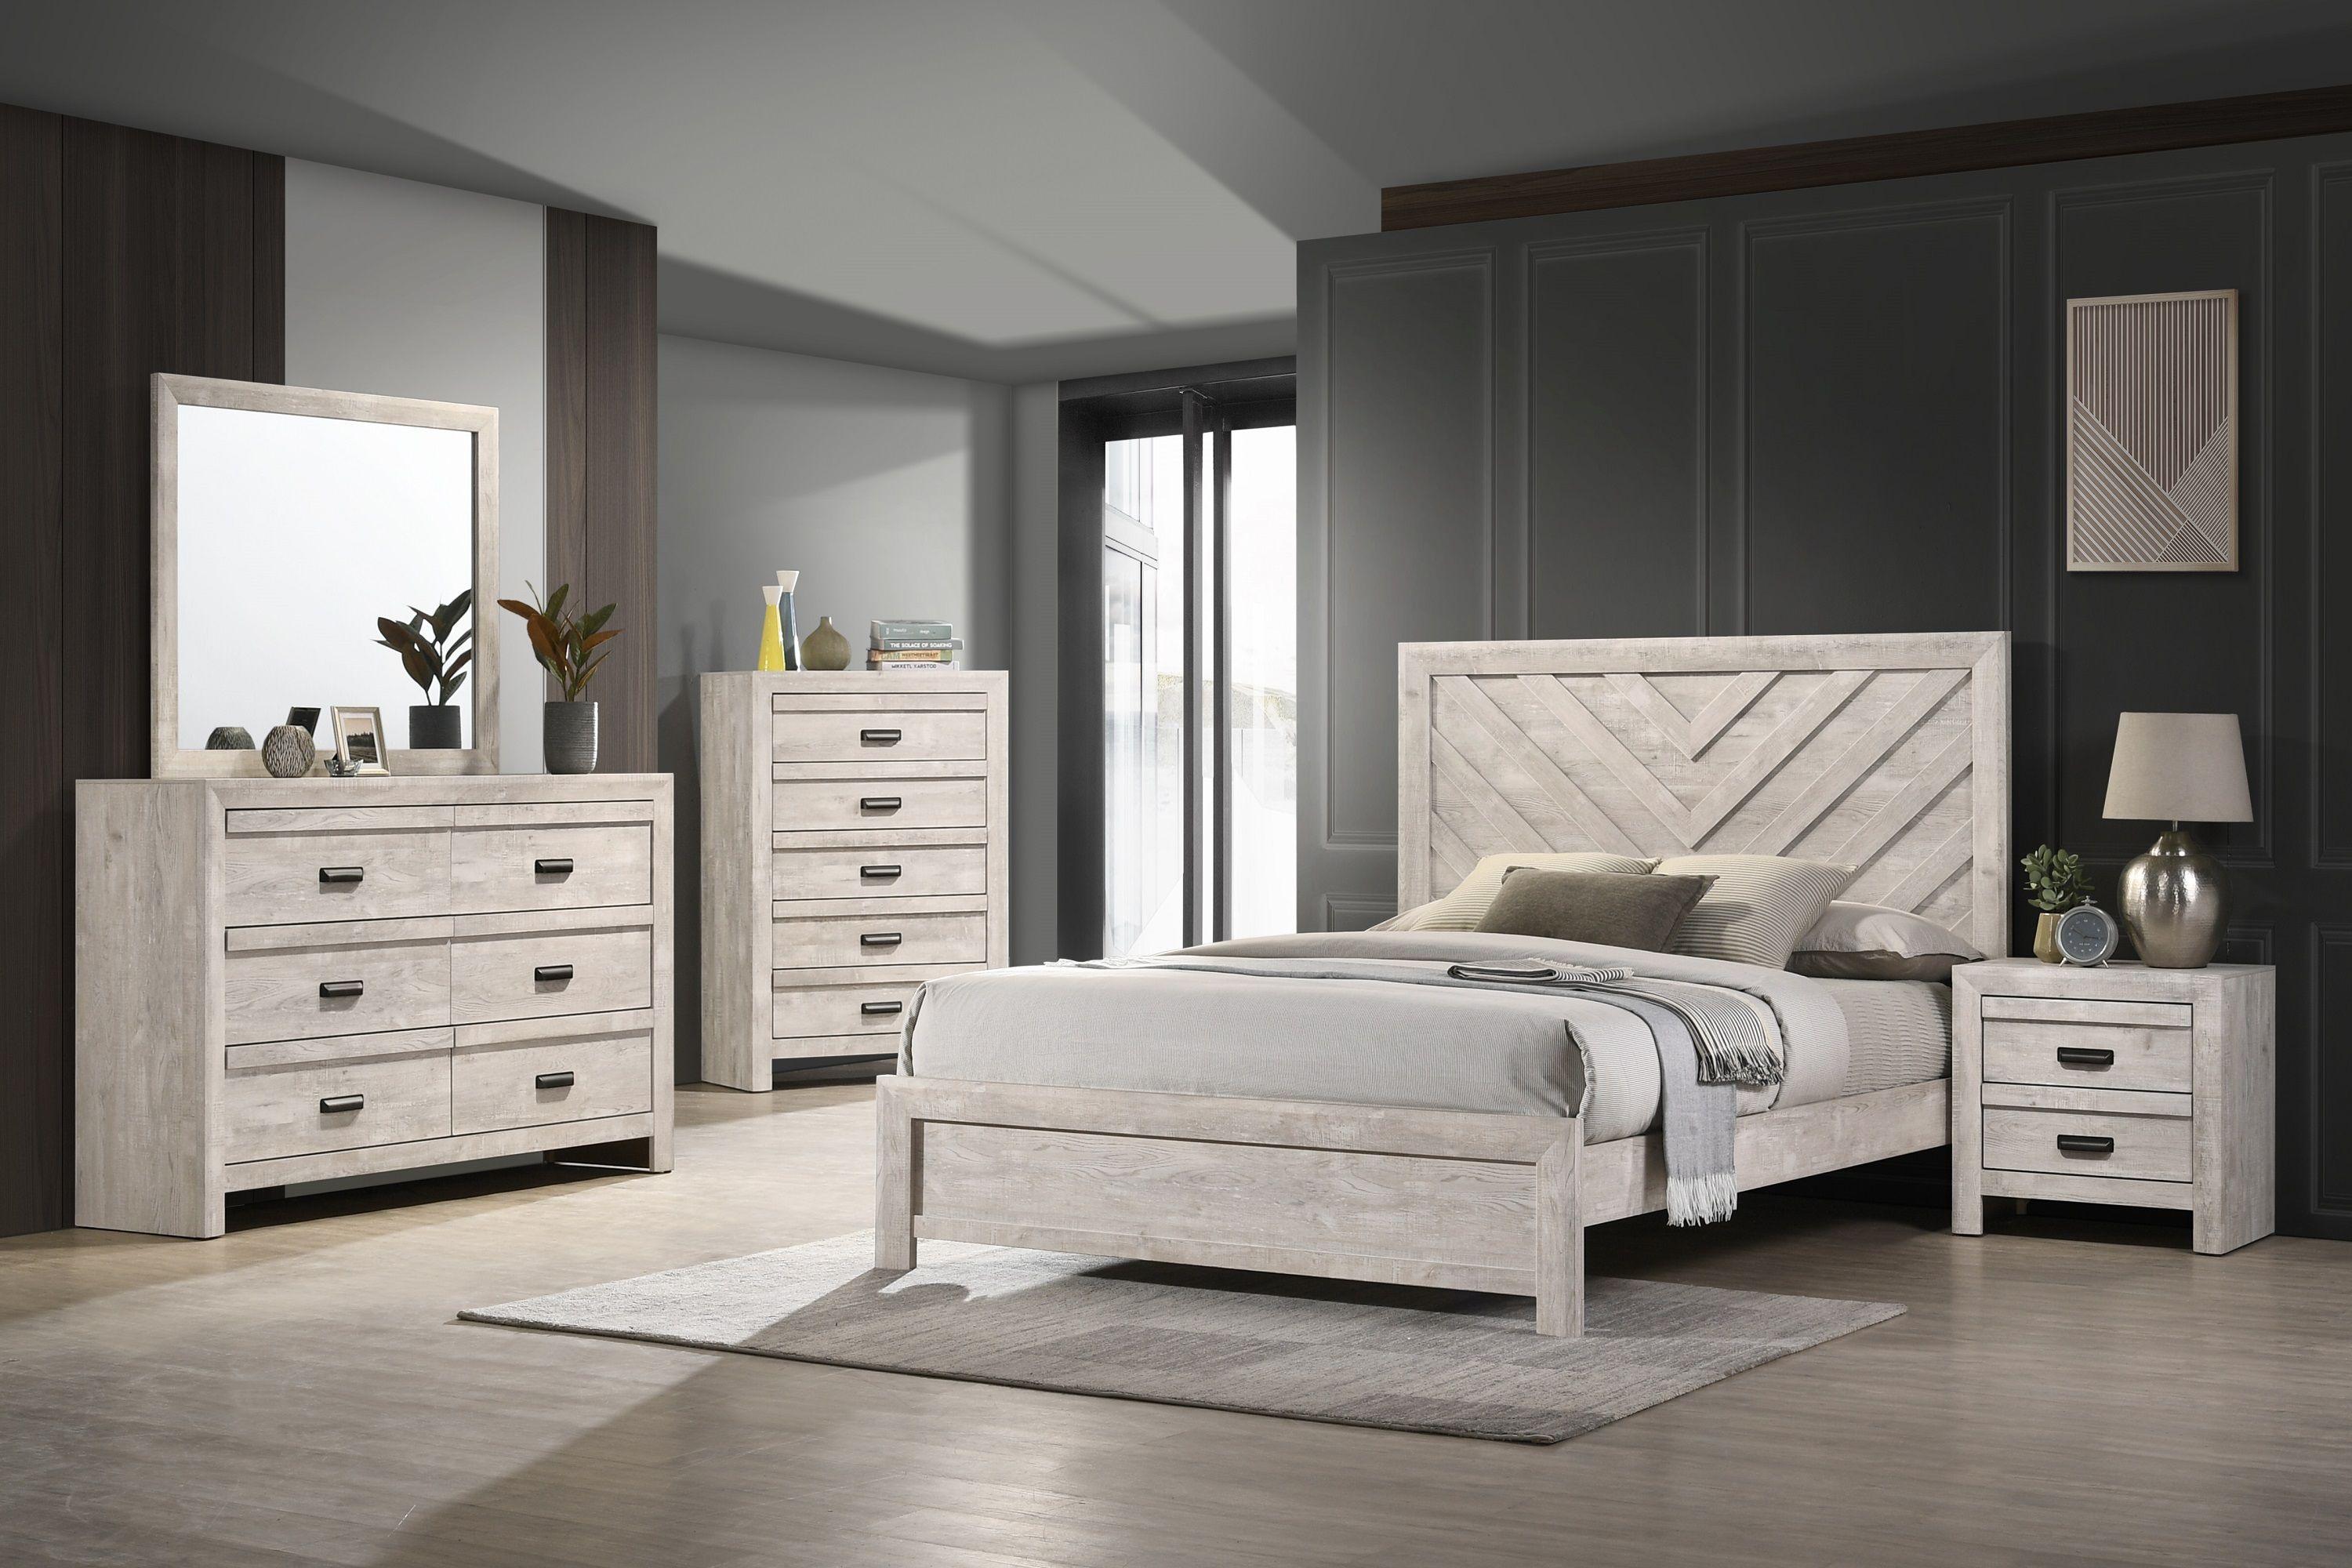 Crown Mark - Valor - Youth Bed - 5th Avenue Furniture